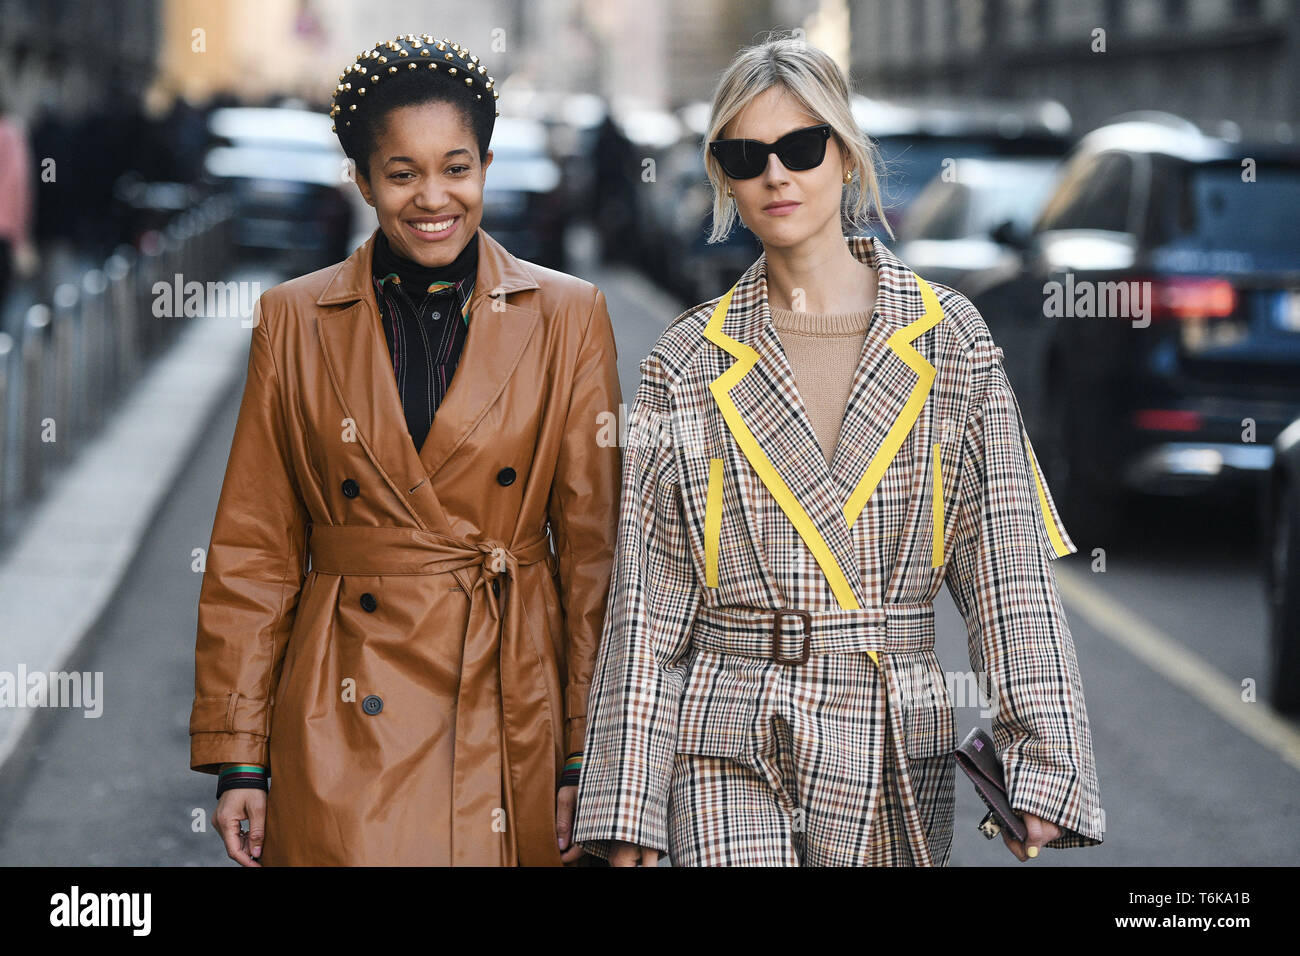 Milan, Italy - February 22, 2019: Street style – Influencers Tamu McPherson and Linda Tol after Stock Photo